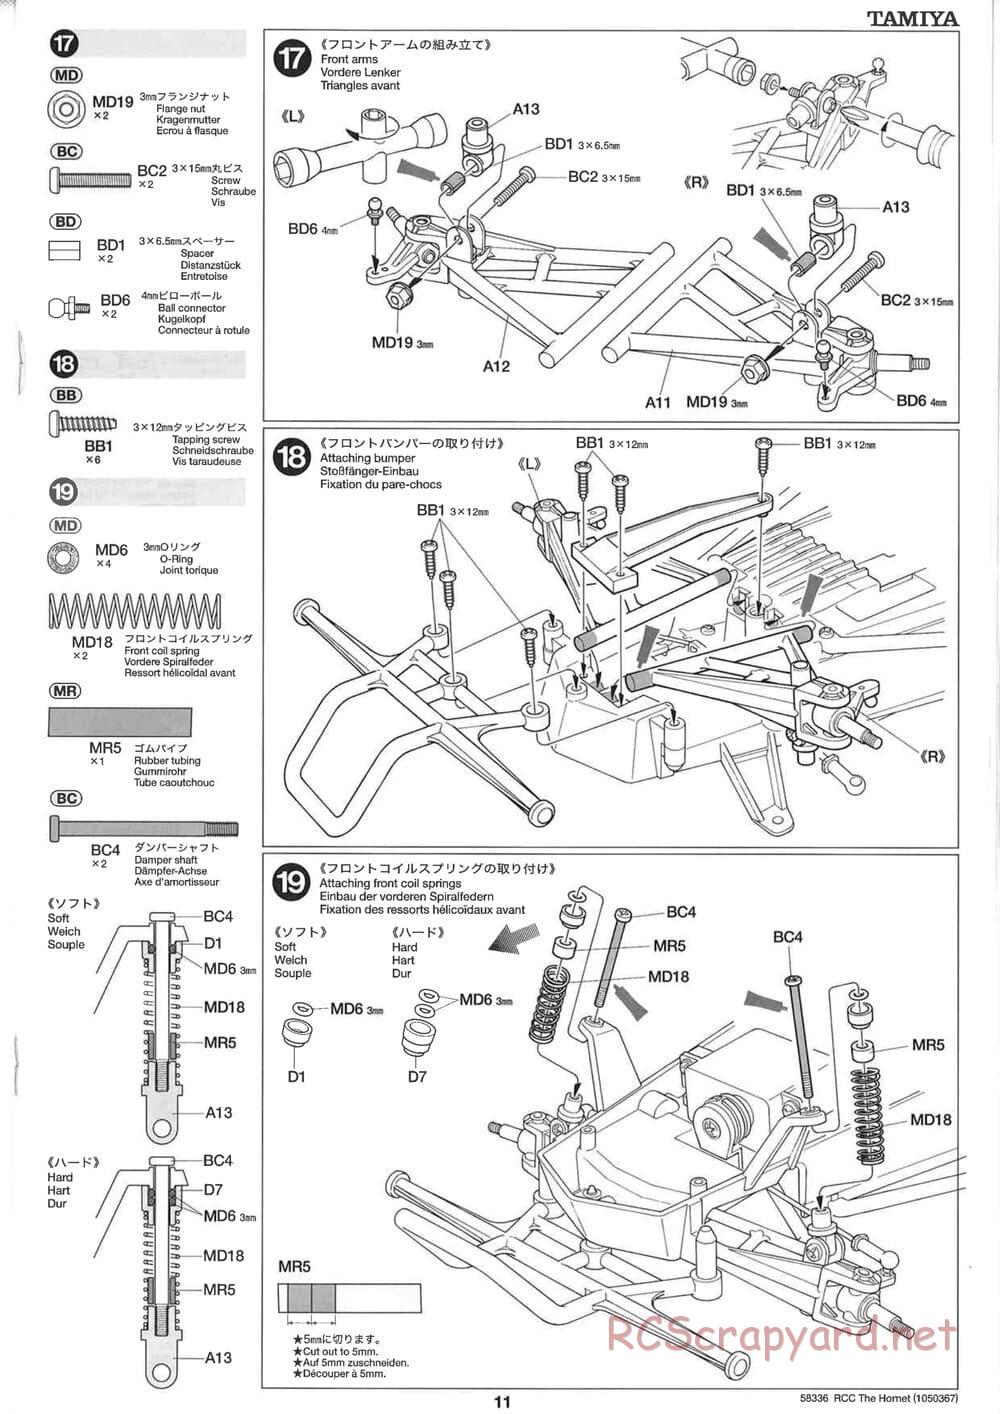 Tamiya - The Hornet (2004) - GH Chassis - Manual - Page 11